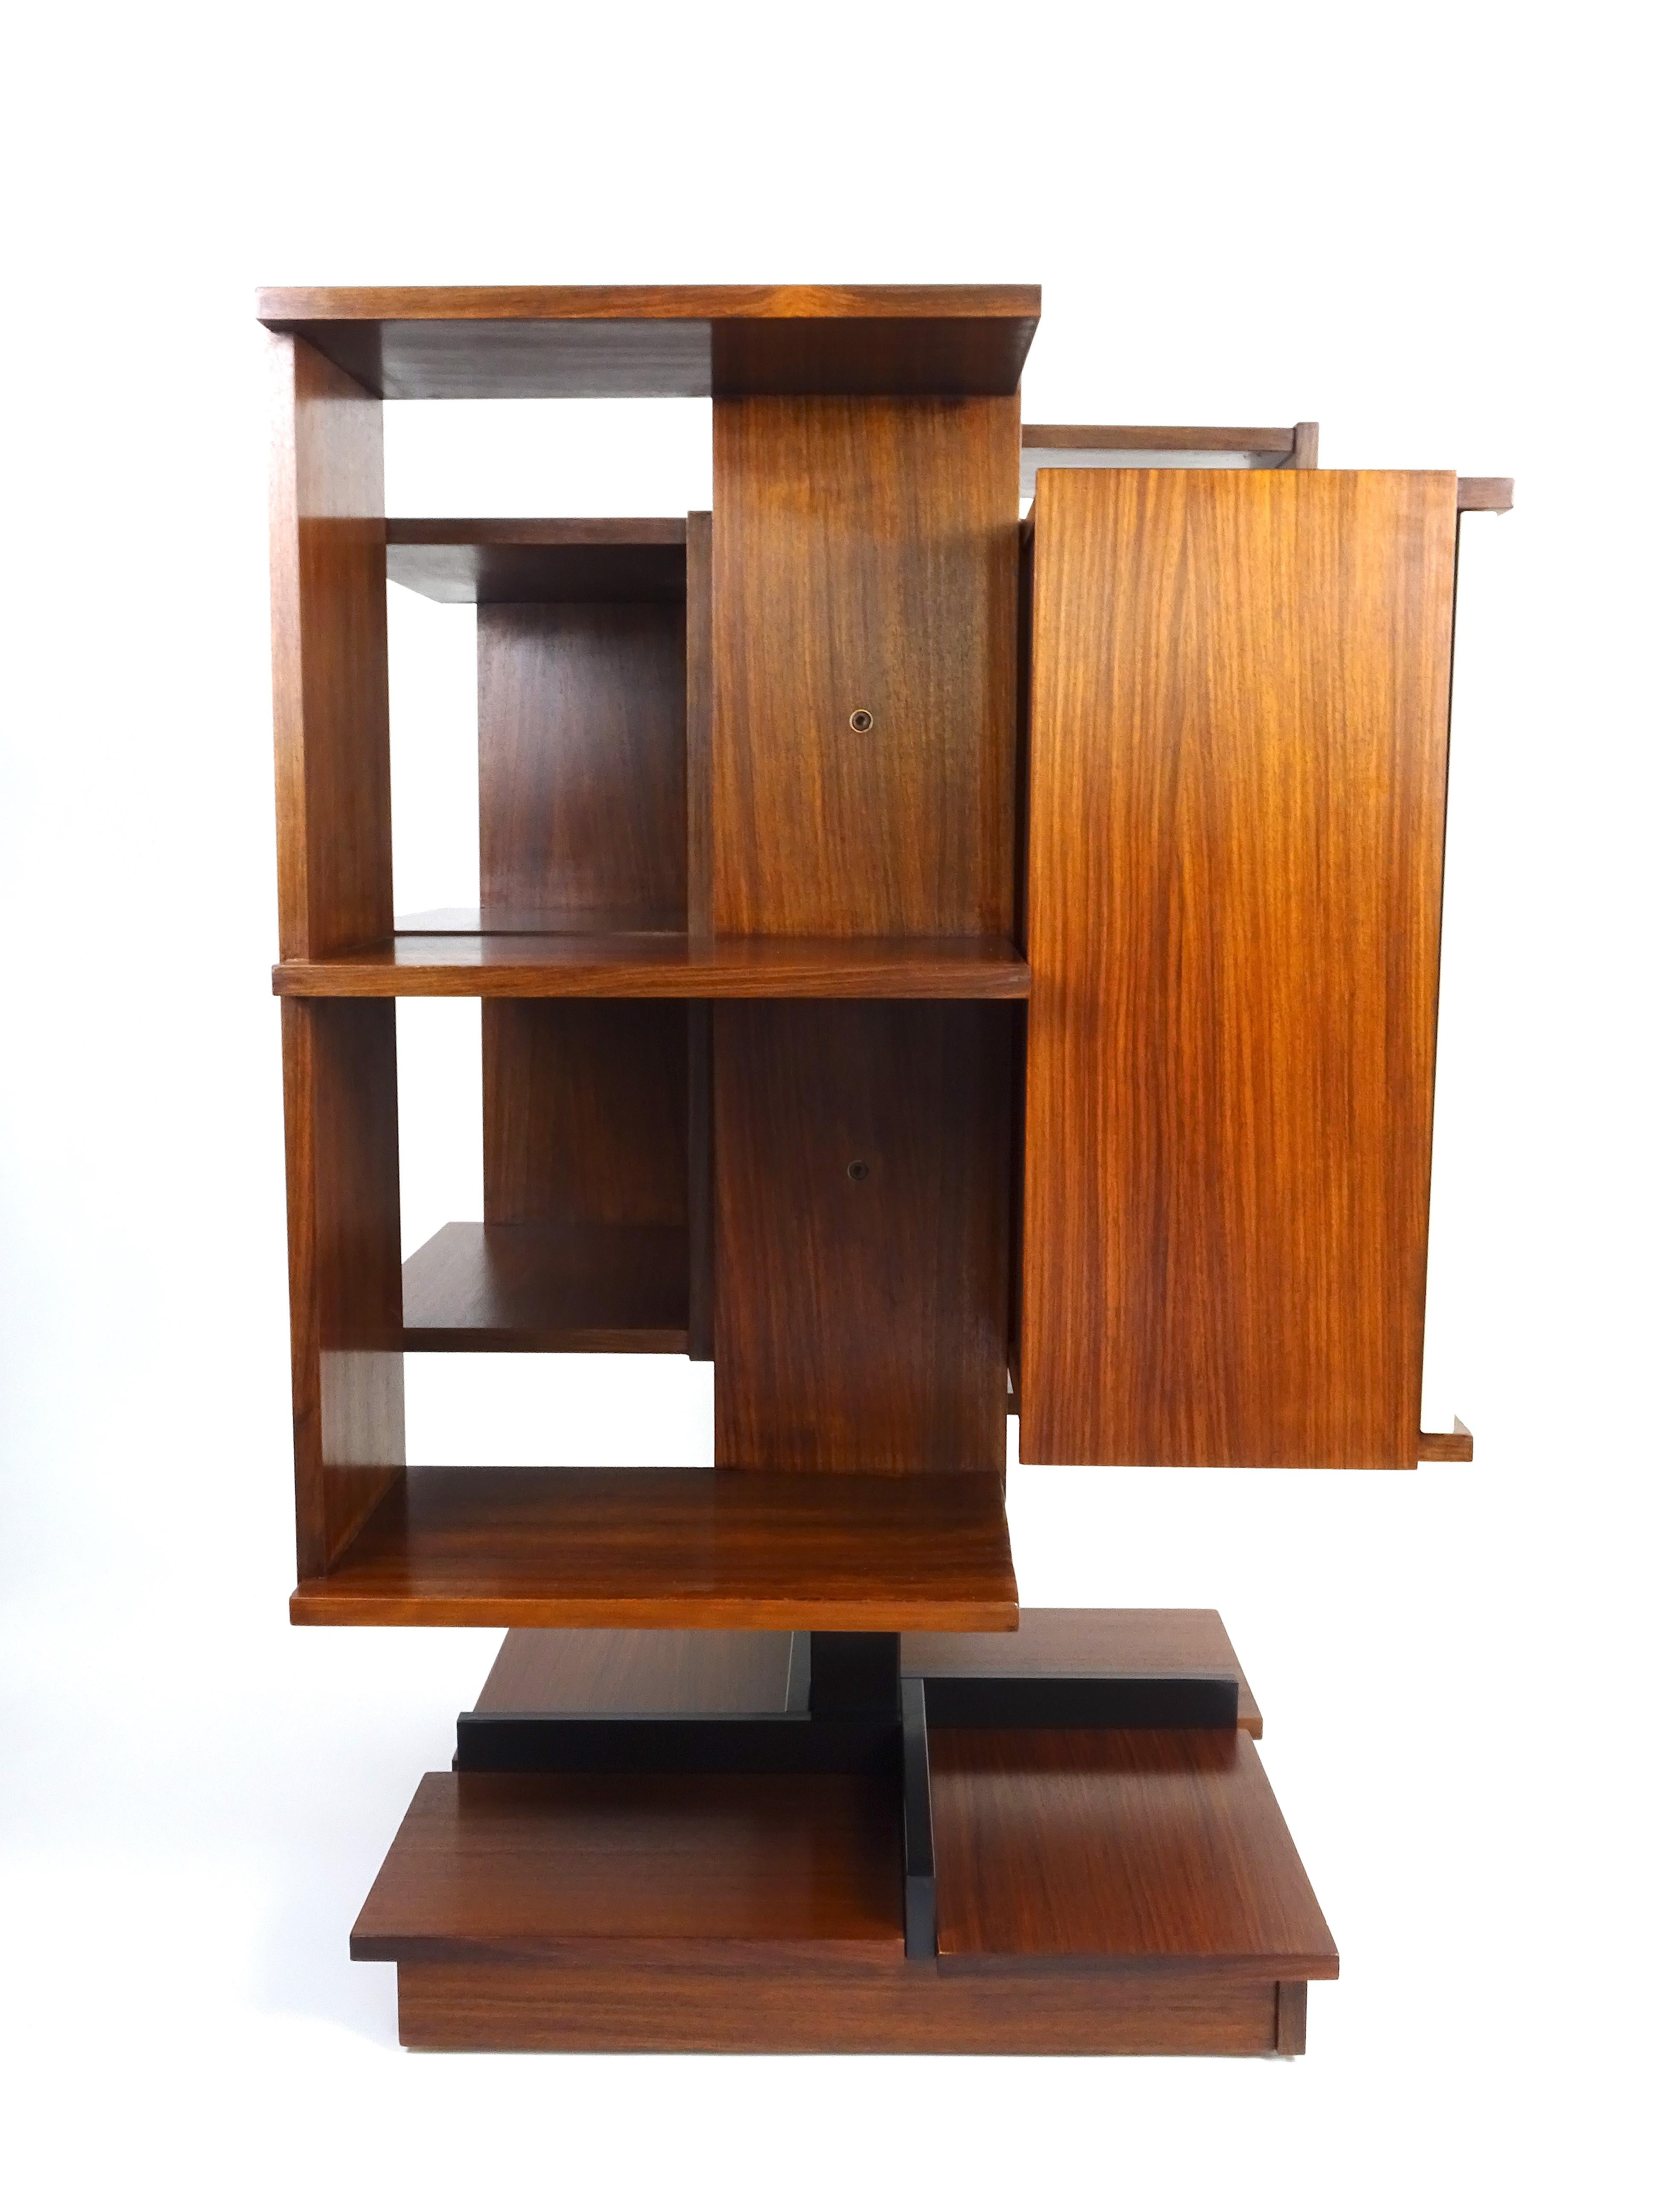 Modular and revolving bookcase in wood veneer with central support in lacquered metal. This vintage item has no defects, but it may show slight traces of use.
